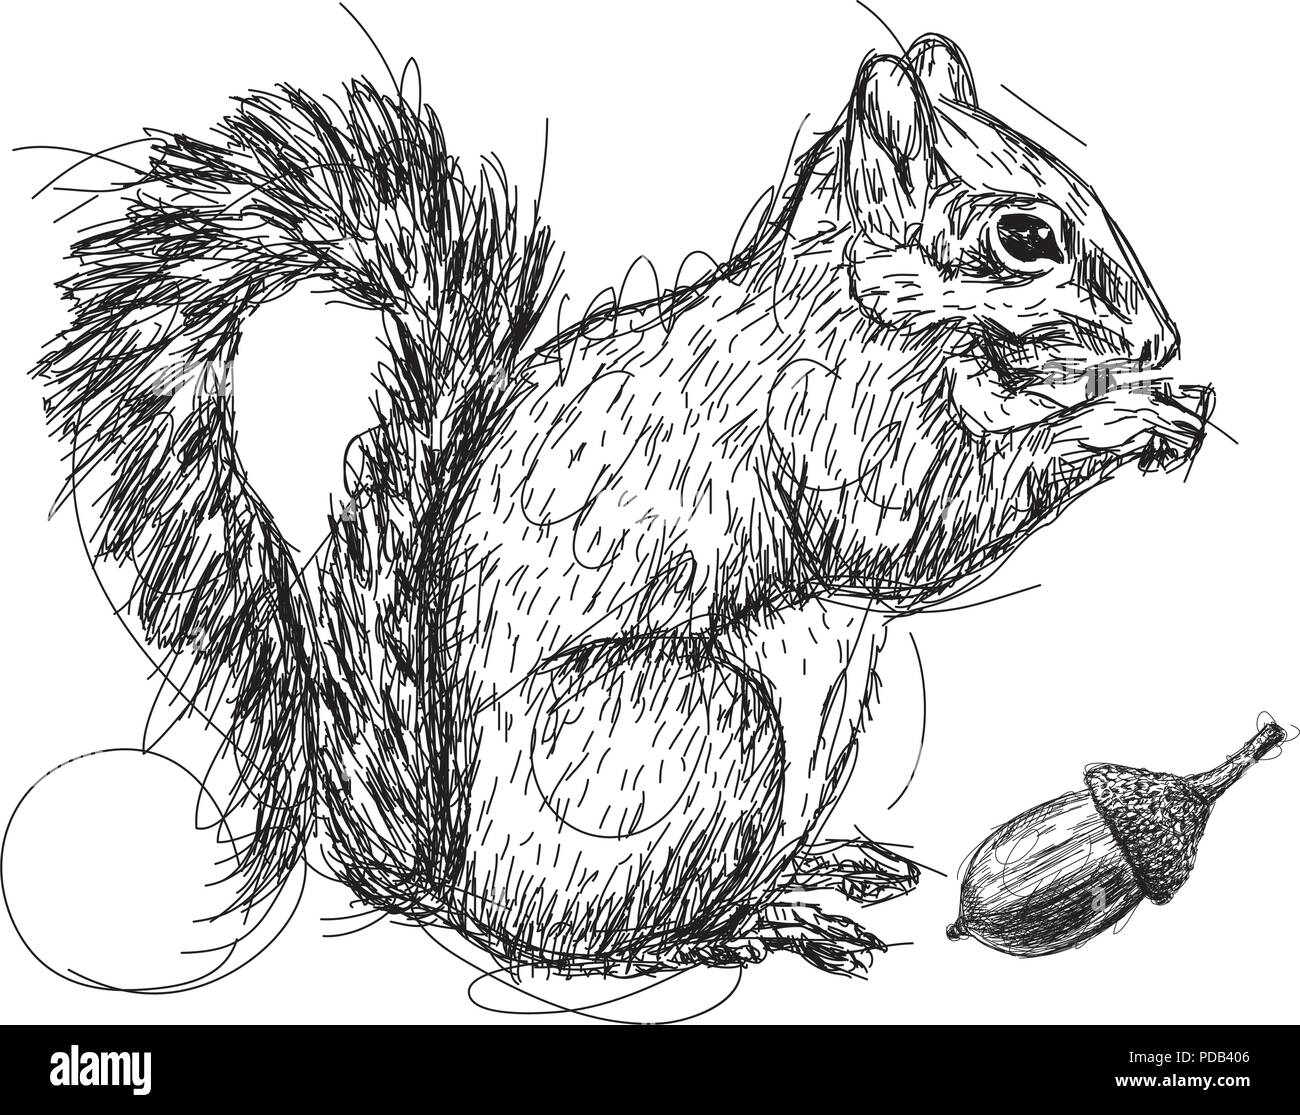 Squirrel Drawing  How To Draw A Squirrel Step By Step